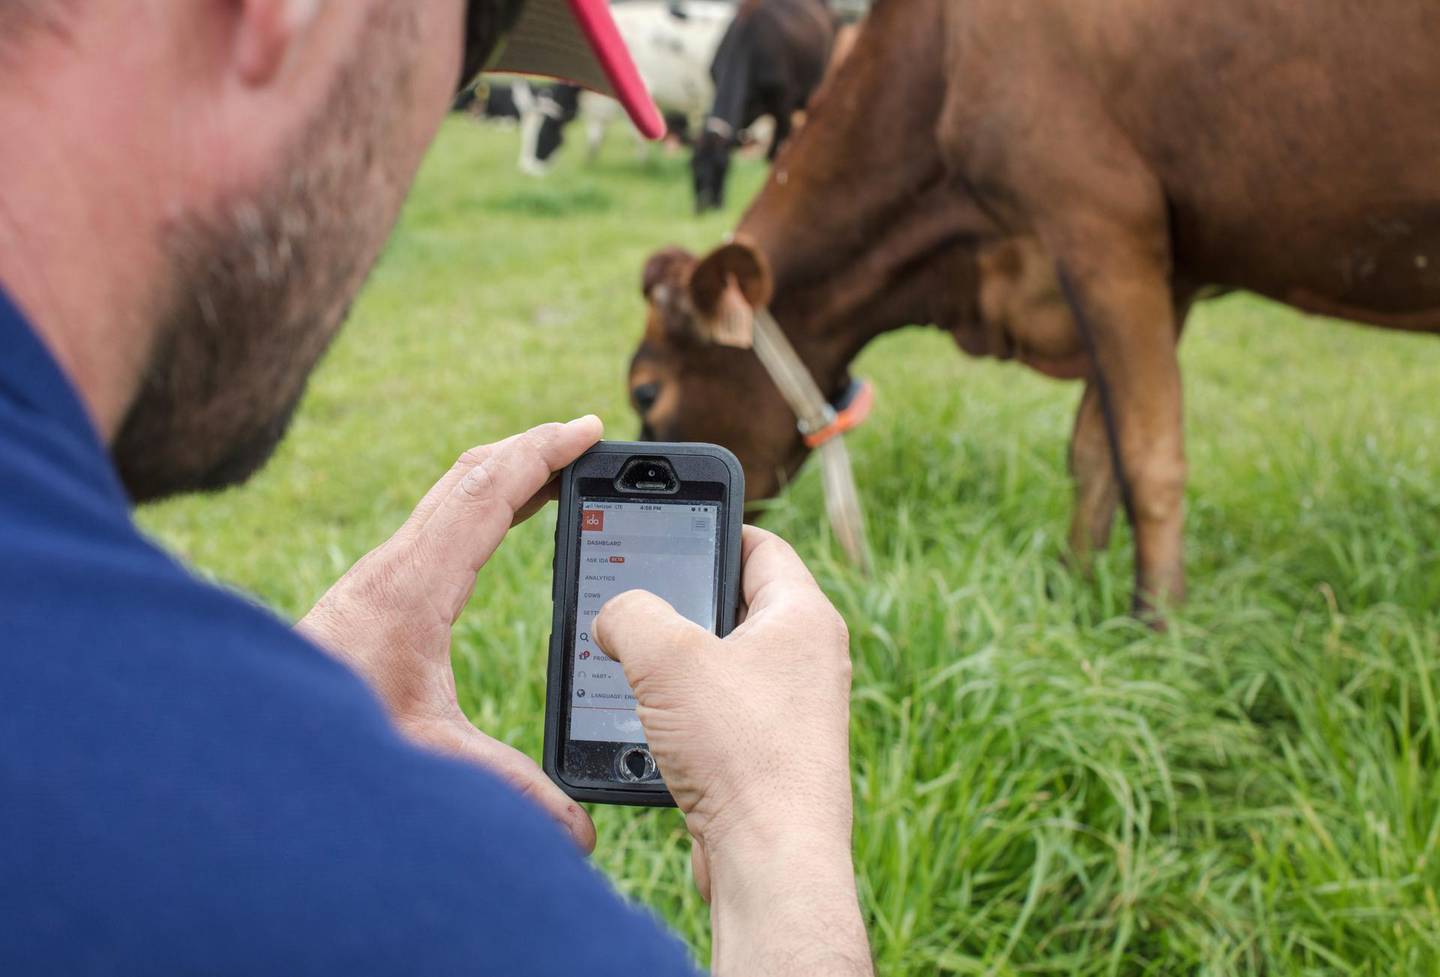 In this undated photo provided by Google, a person uses a phone to monitor a cow's IDA, or â€œThe Intelligent Dairy Farmerâ€™s Assistant,â€ device in a pasture on Seven Oaks Dairy in Waynesboro, Ga. On the cowâ€™s neck is the IDA device created by Connecterra. It uses a motion-sensing device attached to a cowâ€™s neck to transmit its movements to a program driven by artificial intelligence. (Ben Sellon/Google via AP)